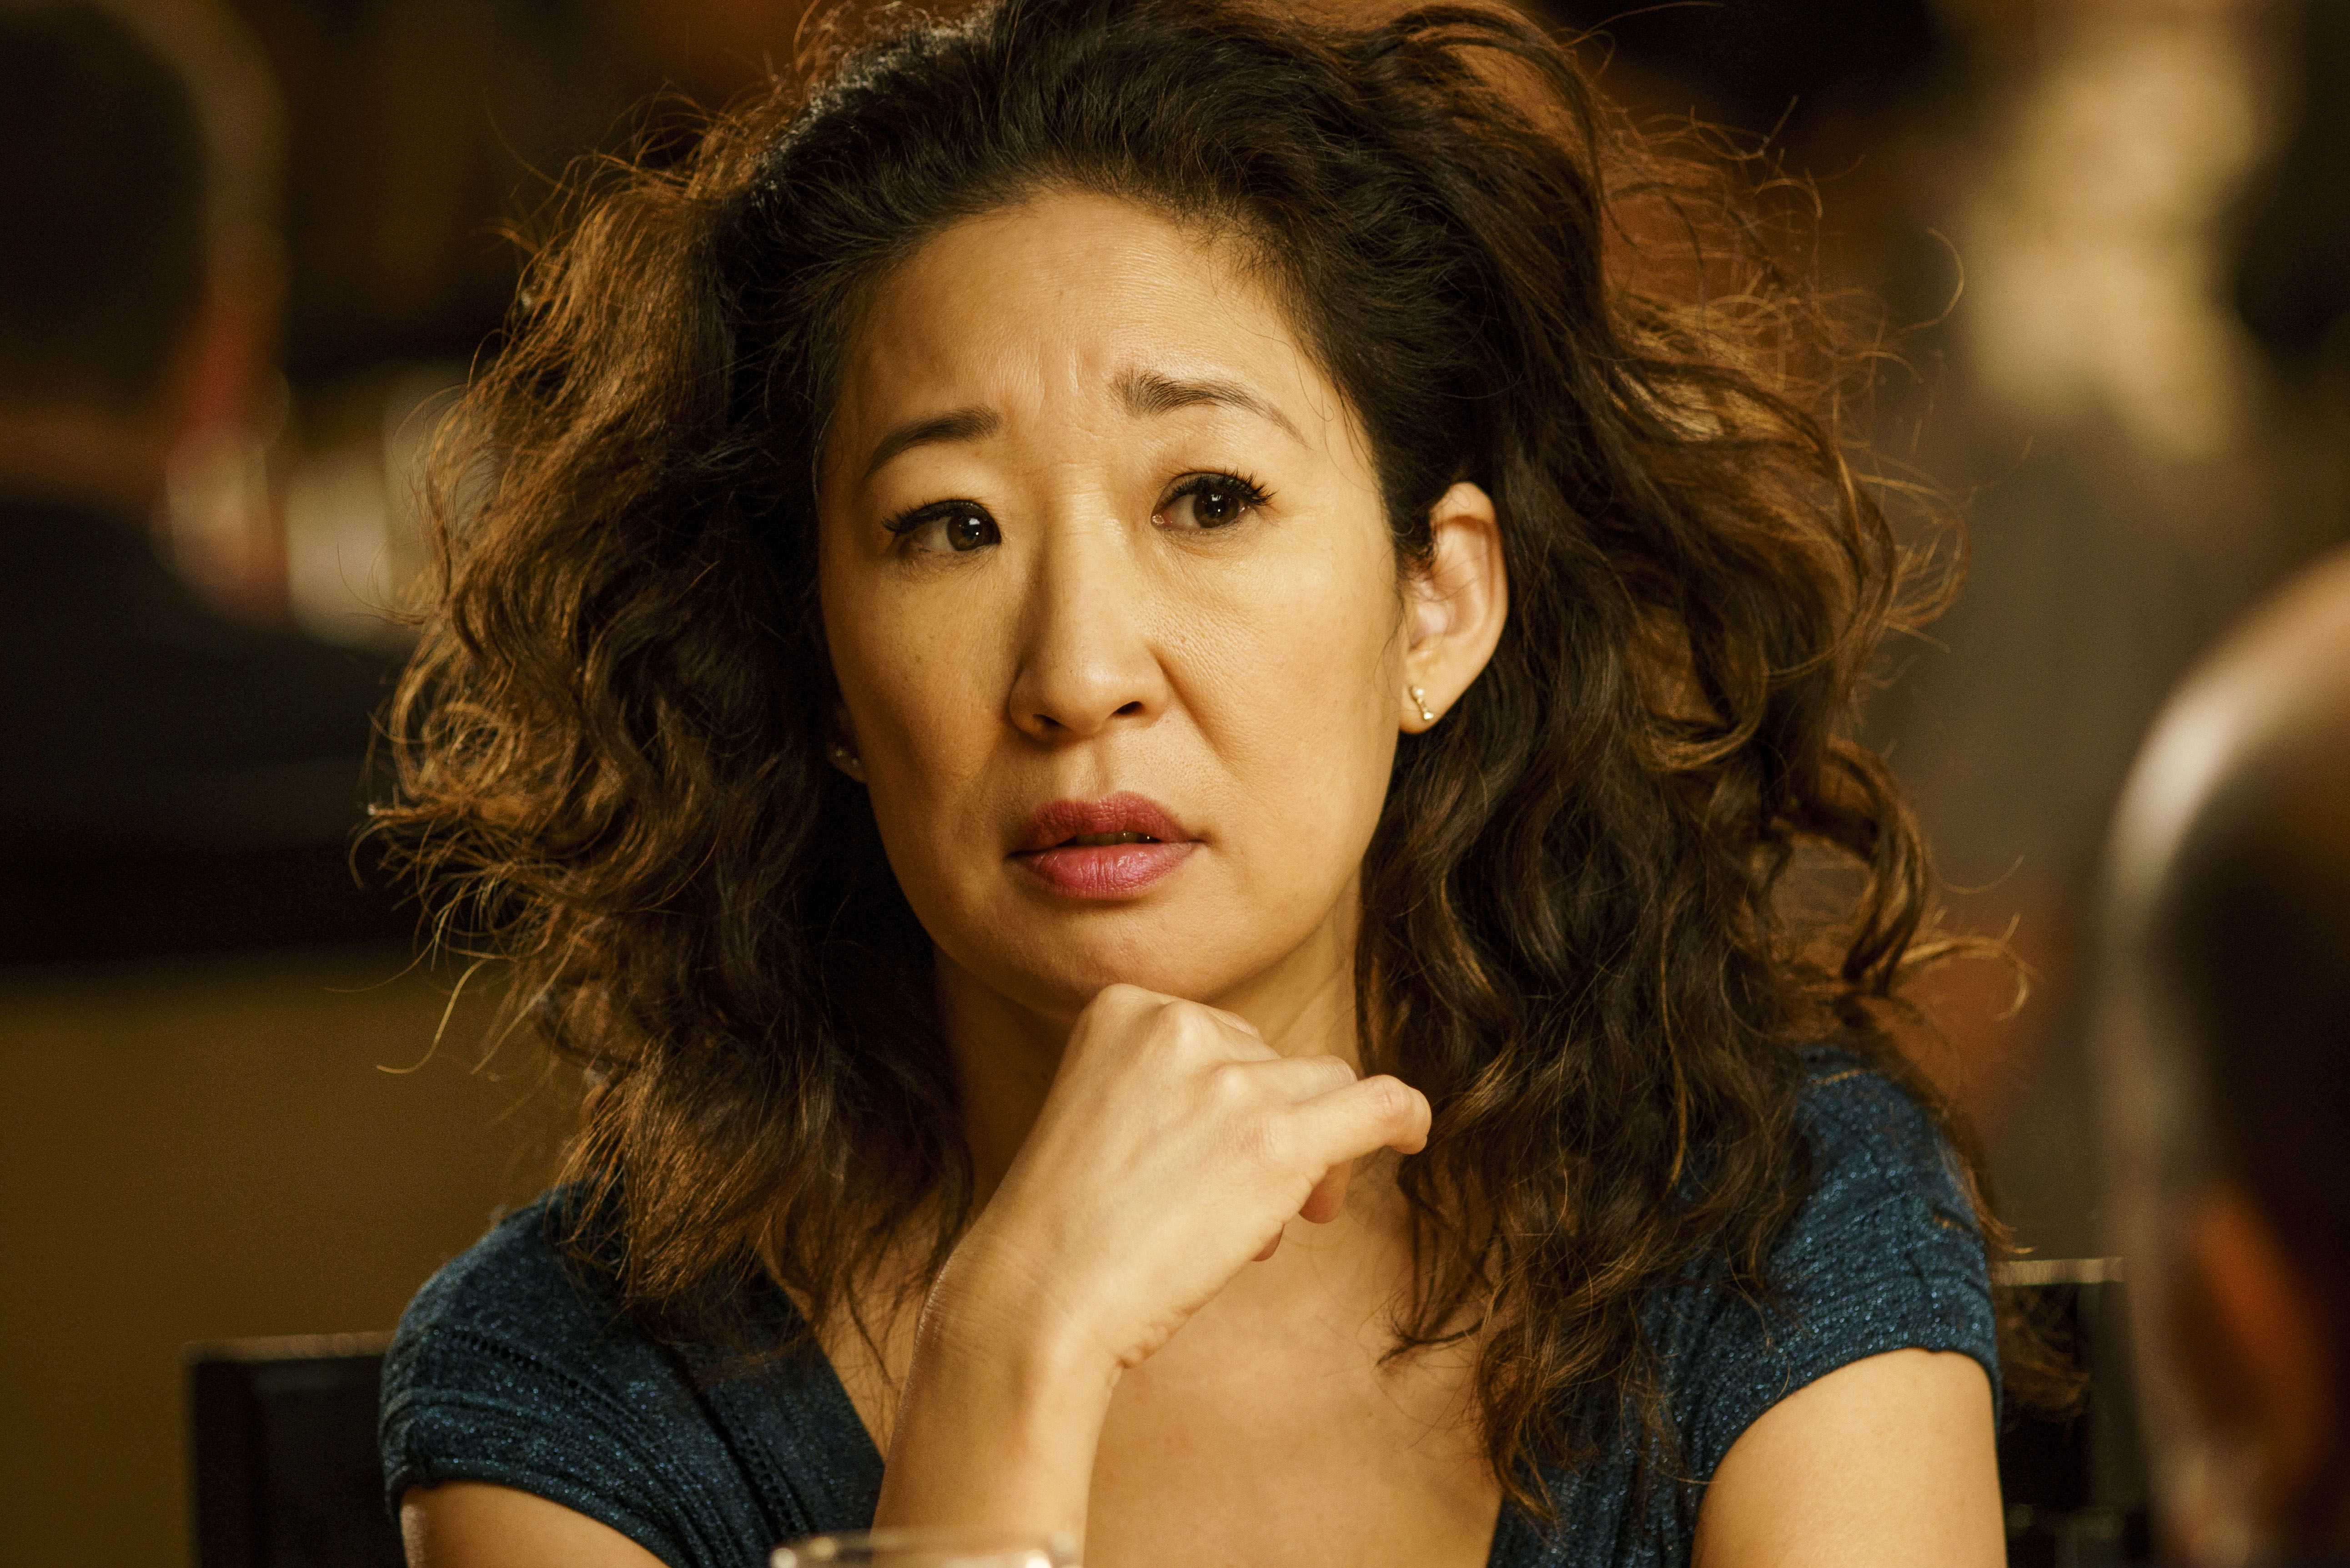 Seeing Sandra Oh's Curls in 'Killing Eve' Helped Me Finally Love My Hair -  Asians With Curly Hair